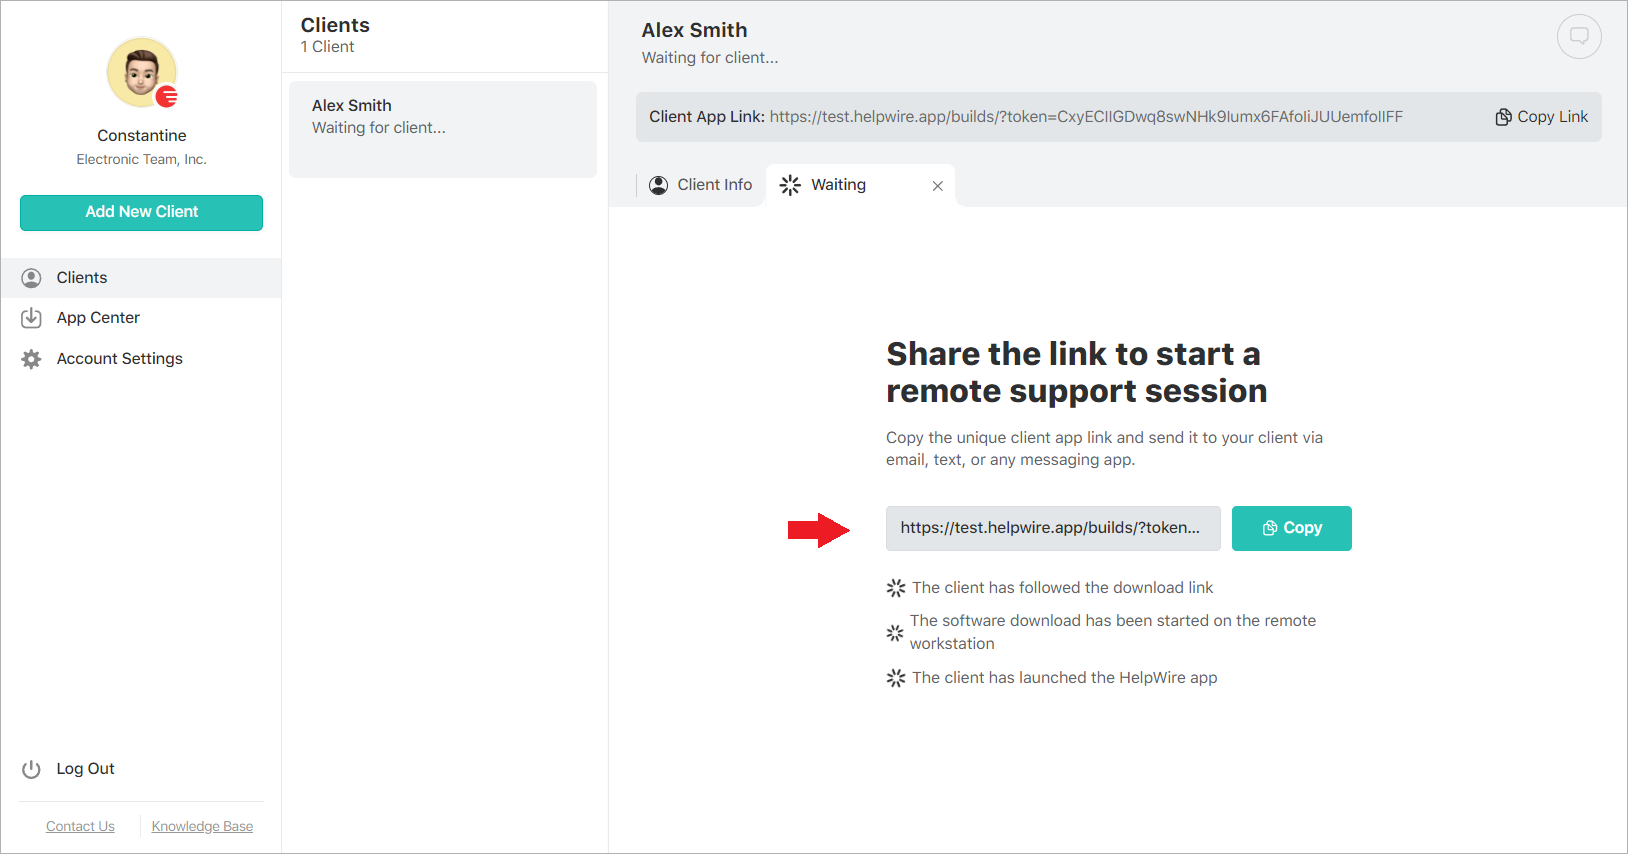 Sharing the client app link with a client to start a remote control session in HelpWire